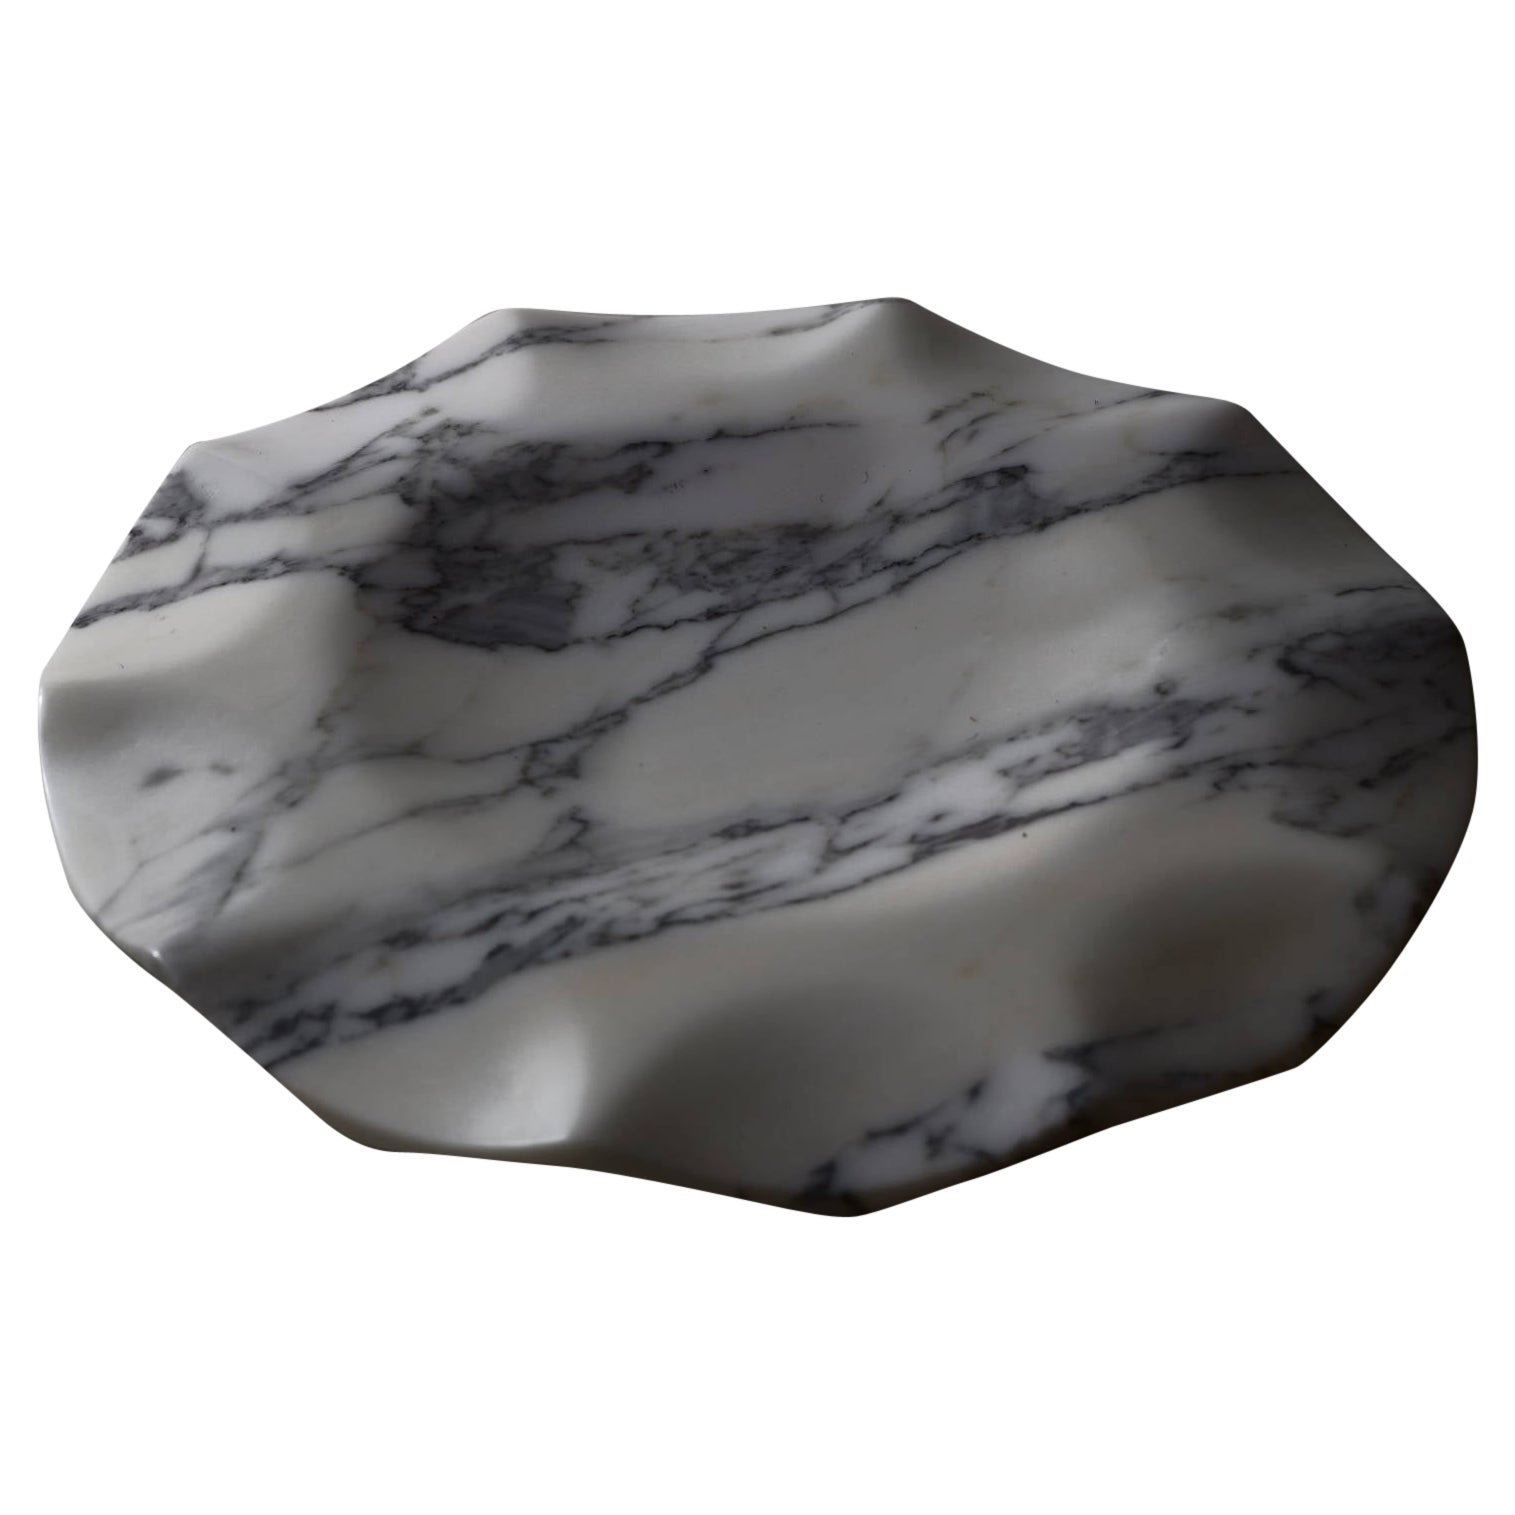 Arabescato Marble Marmo Fluido Centrepiece, Tray By DFdesignlab  For Sale